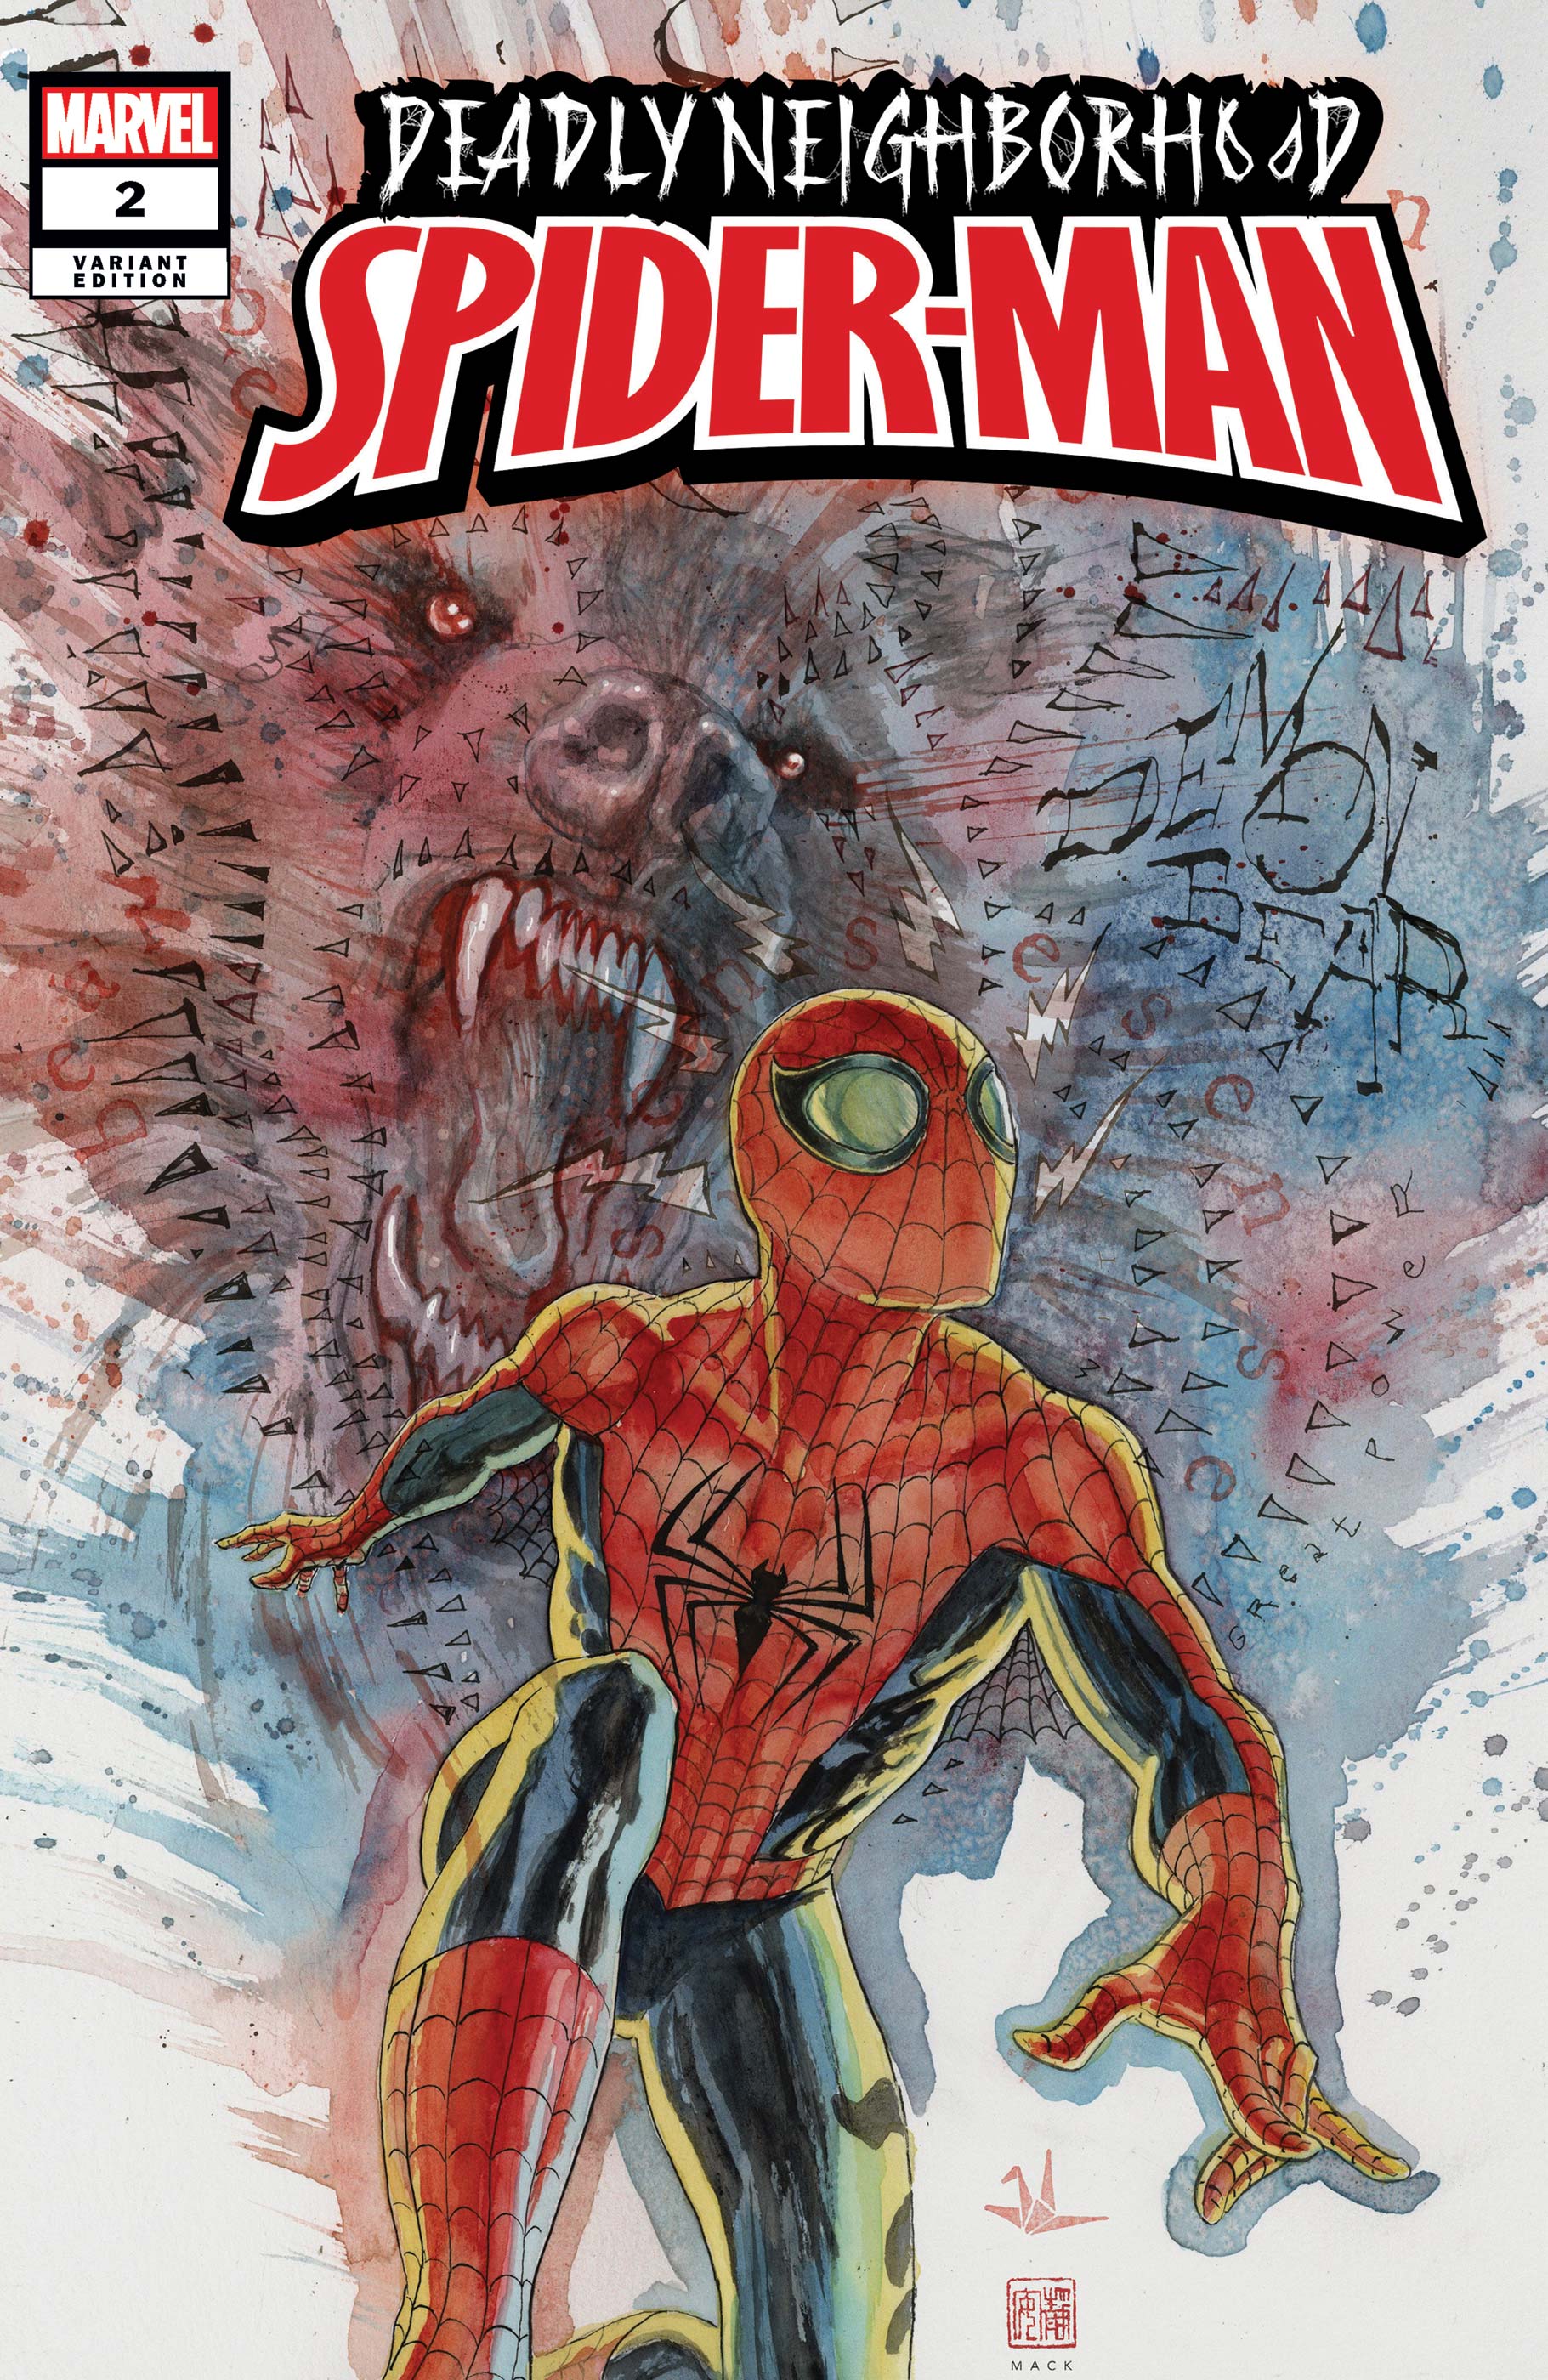 Marvel and Taboo present the DEADLY NEIGHBORHOOD SPIDER-MAN